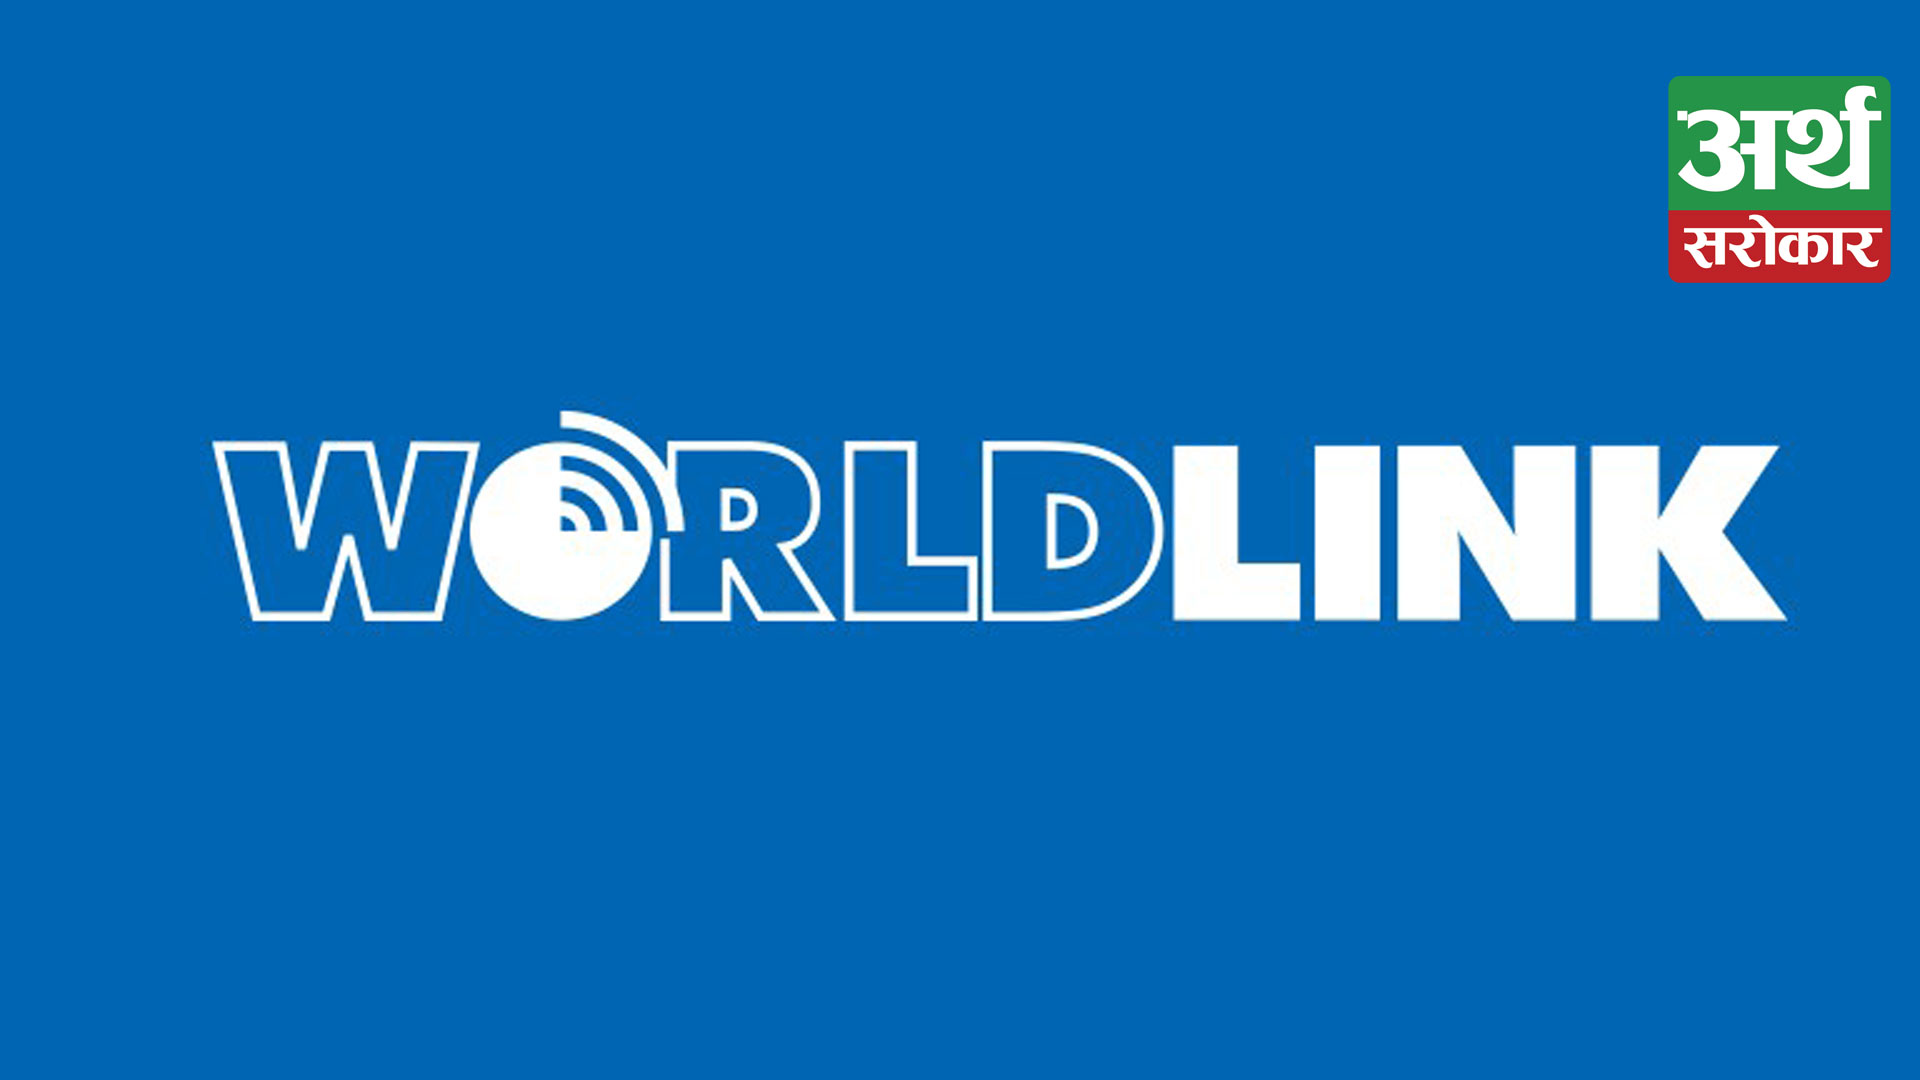 WorldLink introduces Nepal’s fastest Internet, Announces new Internet package with at least 150 Mbps speed